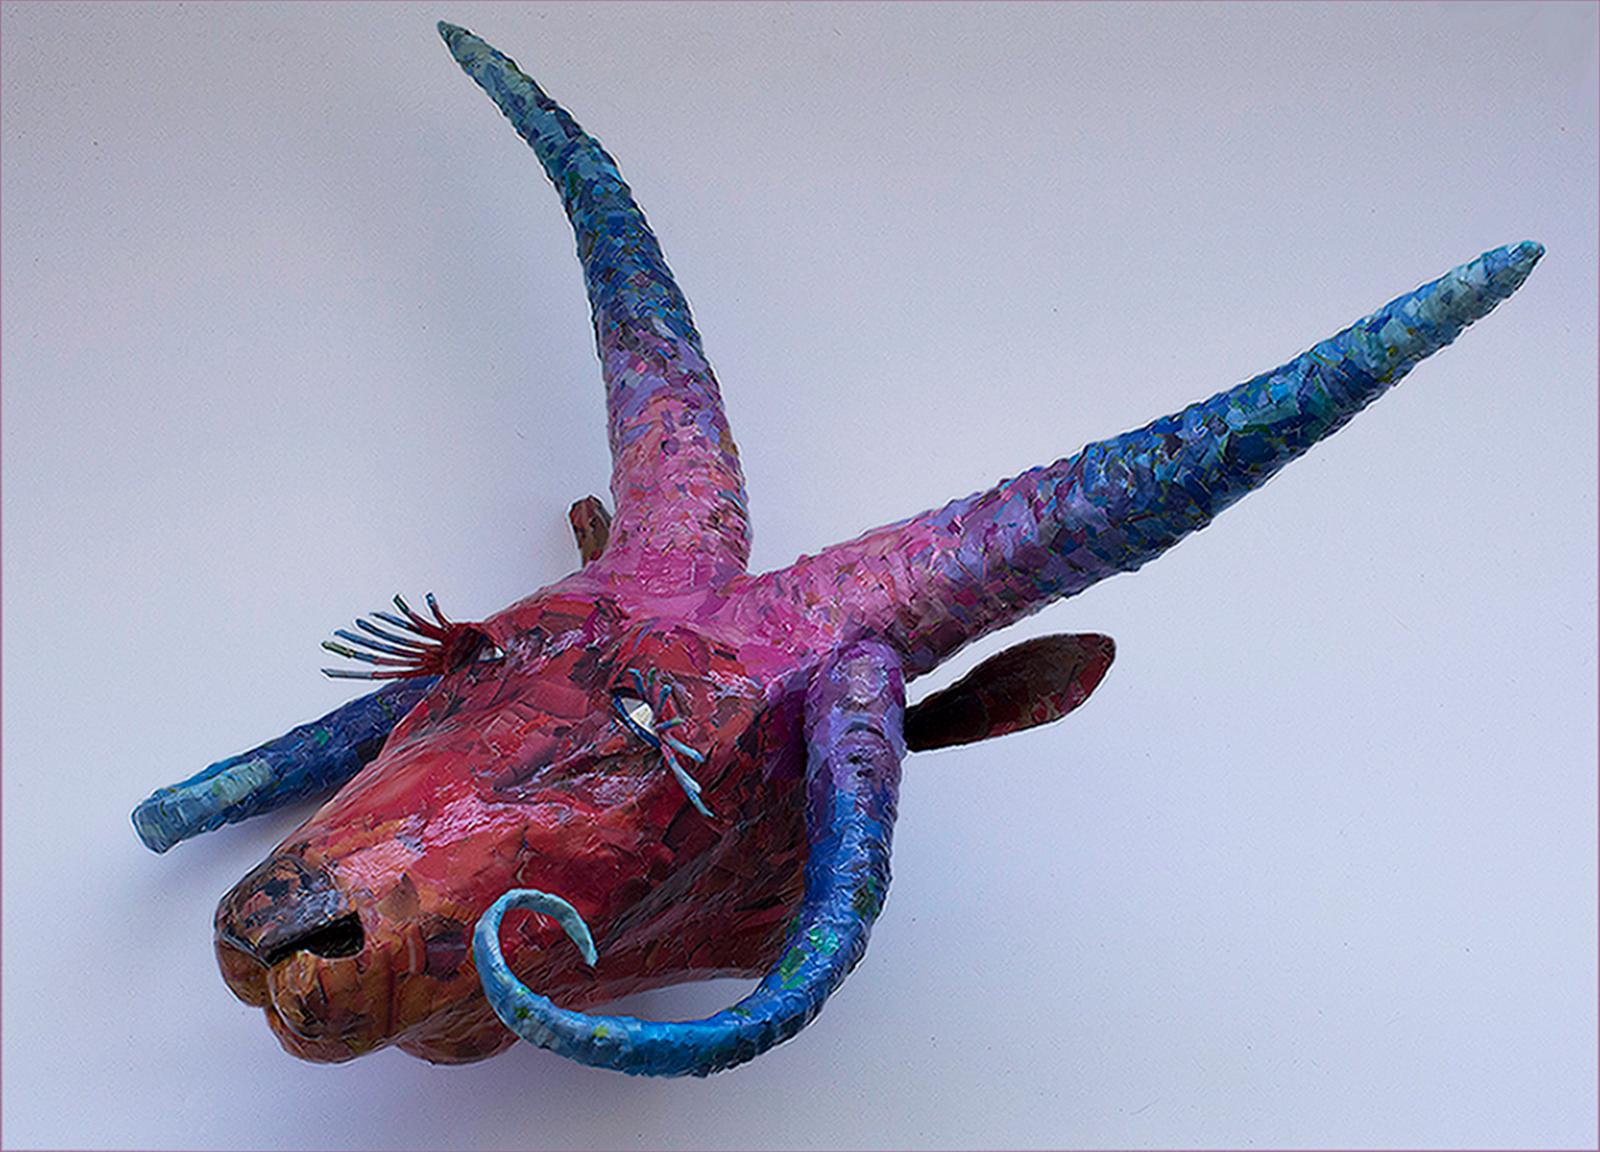 Manx - Colorful & Playful Sculpture of Endangered Animal Species in Purple + Red - Contemporary Mixed Media Art by Yulia Shtern